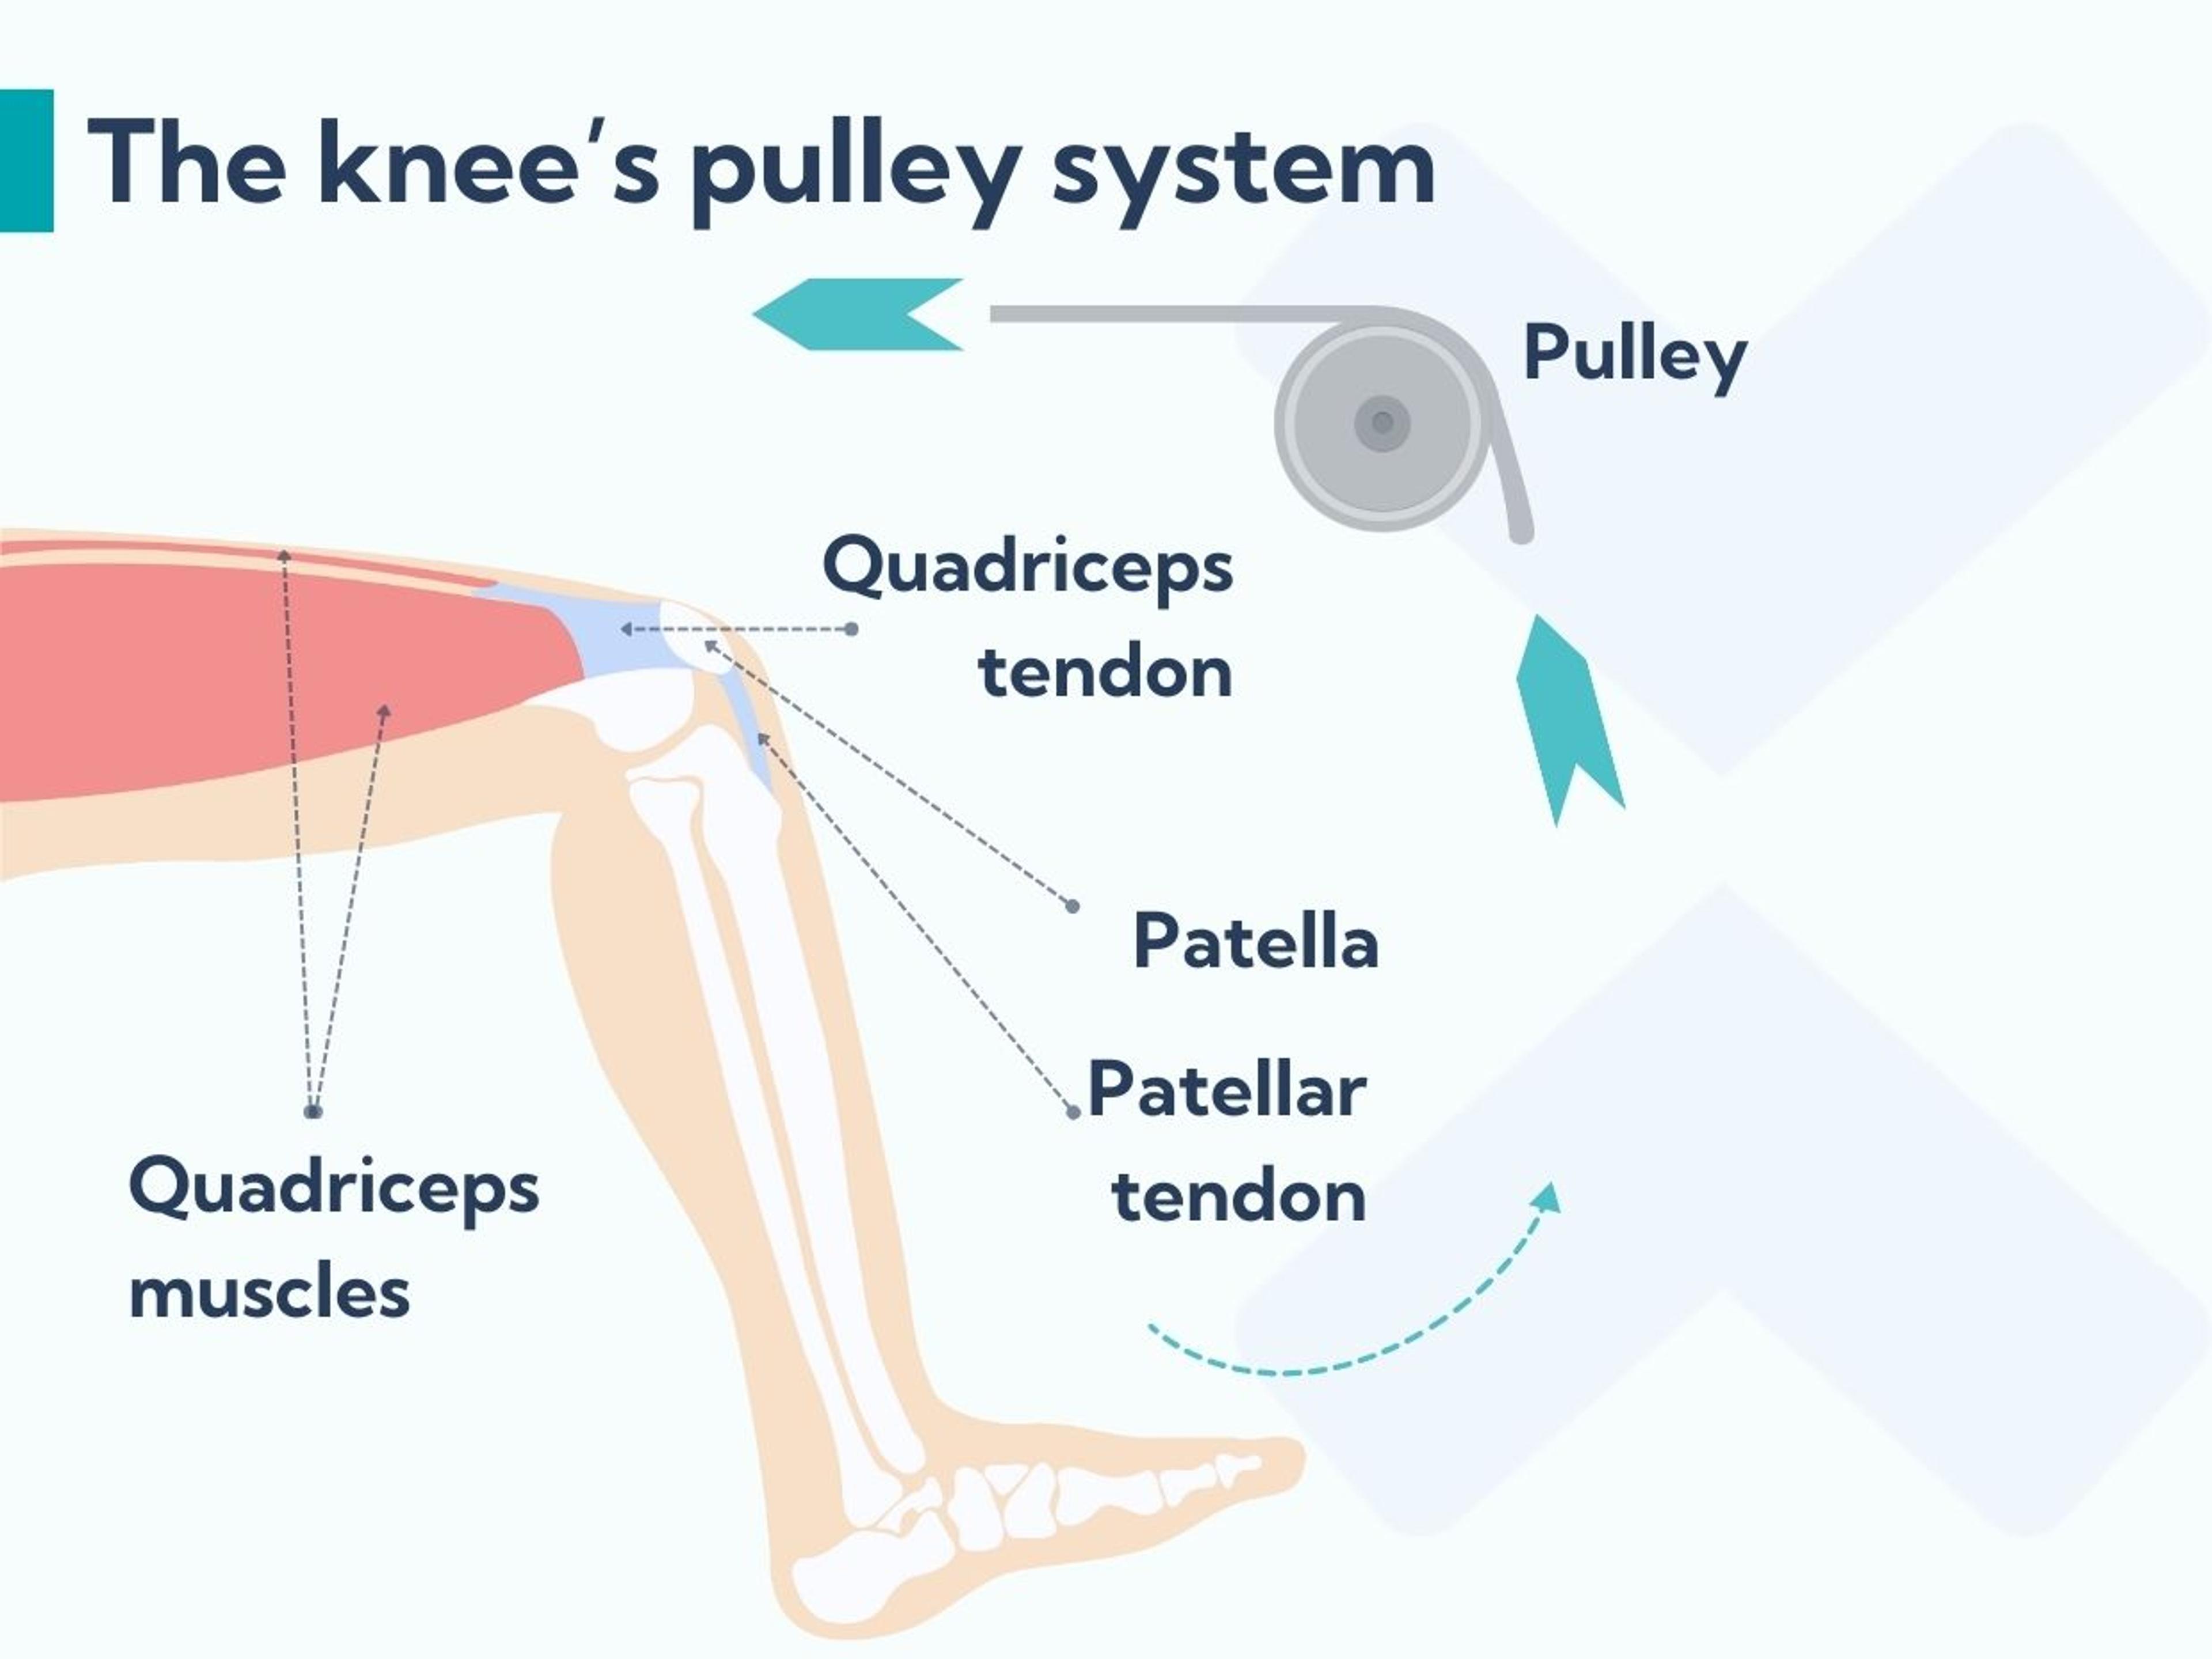 The patellar tendon forms part of the knee's pulley system and this is affected when you have patellar tendonitis.